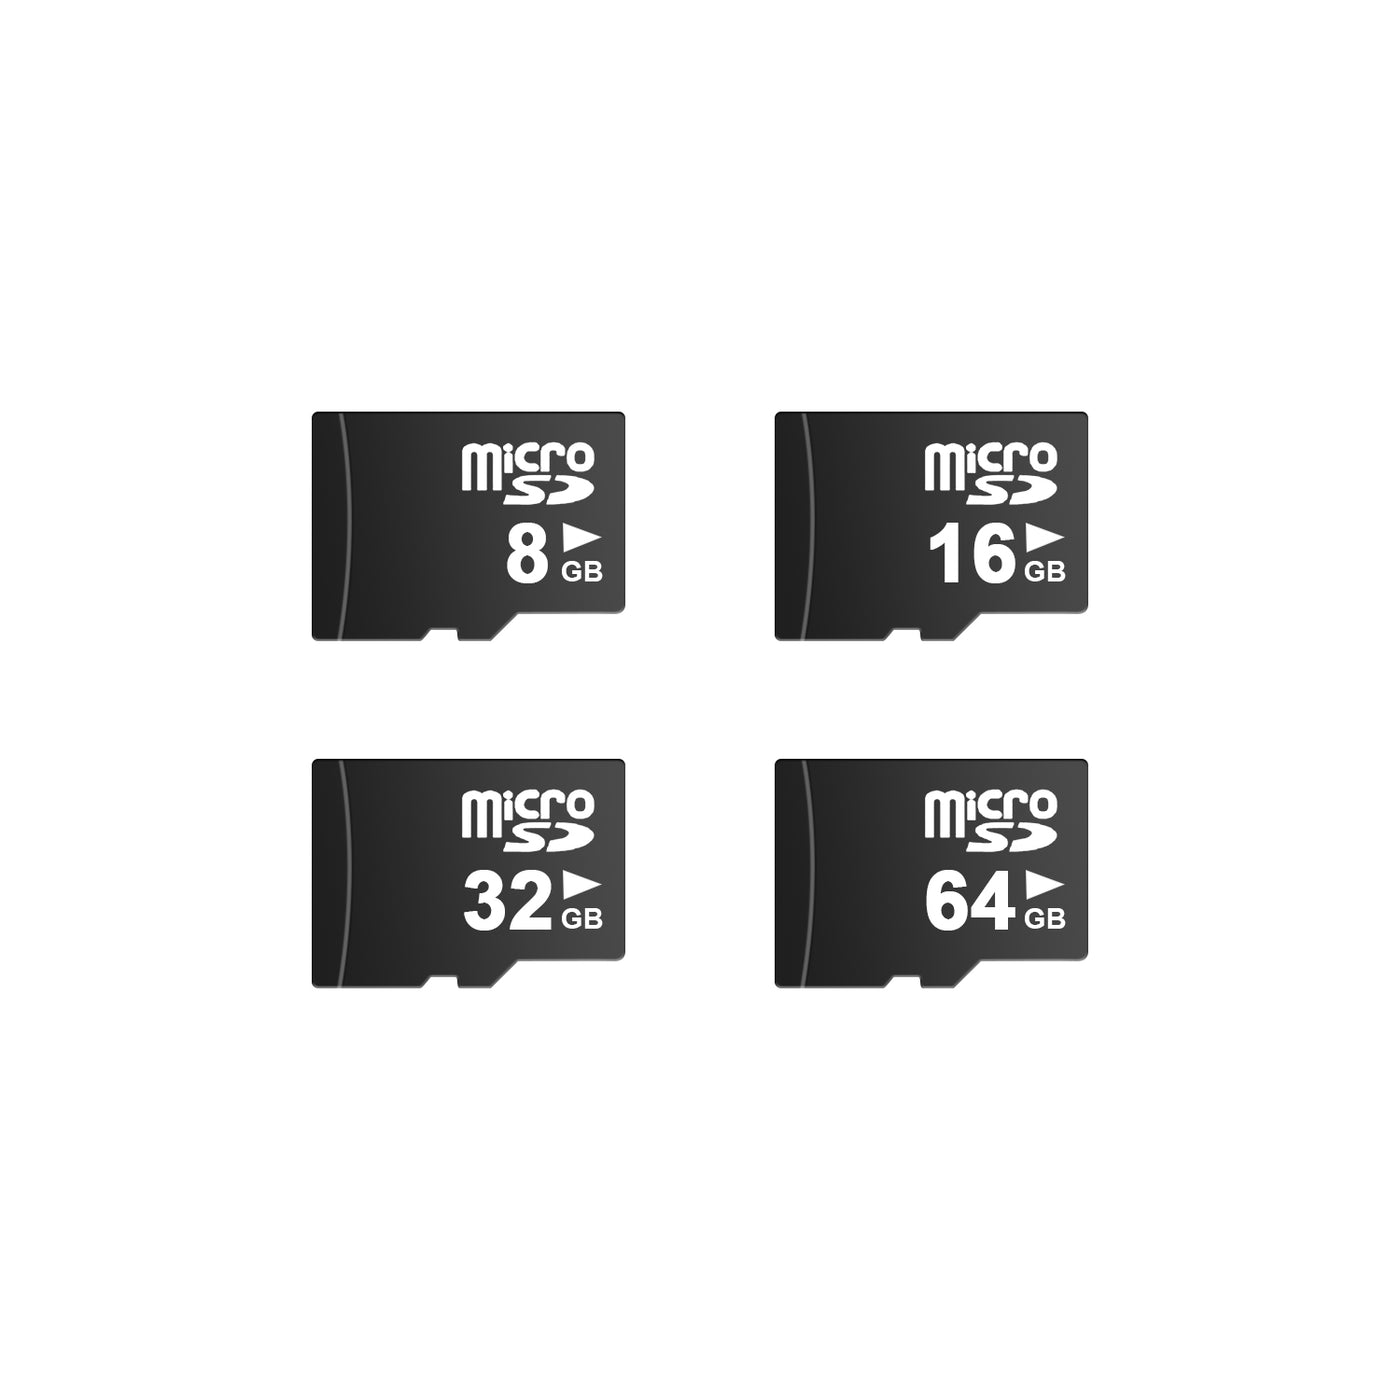 Micro SD Card for Smart Cameras for Local Video Storage – Hiseeu